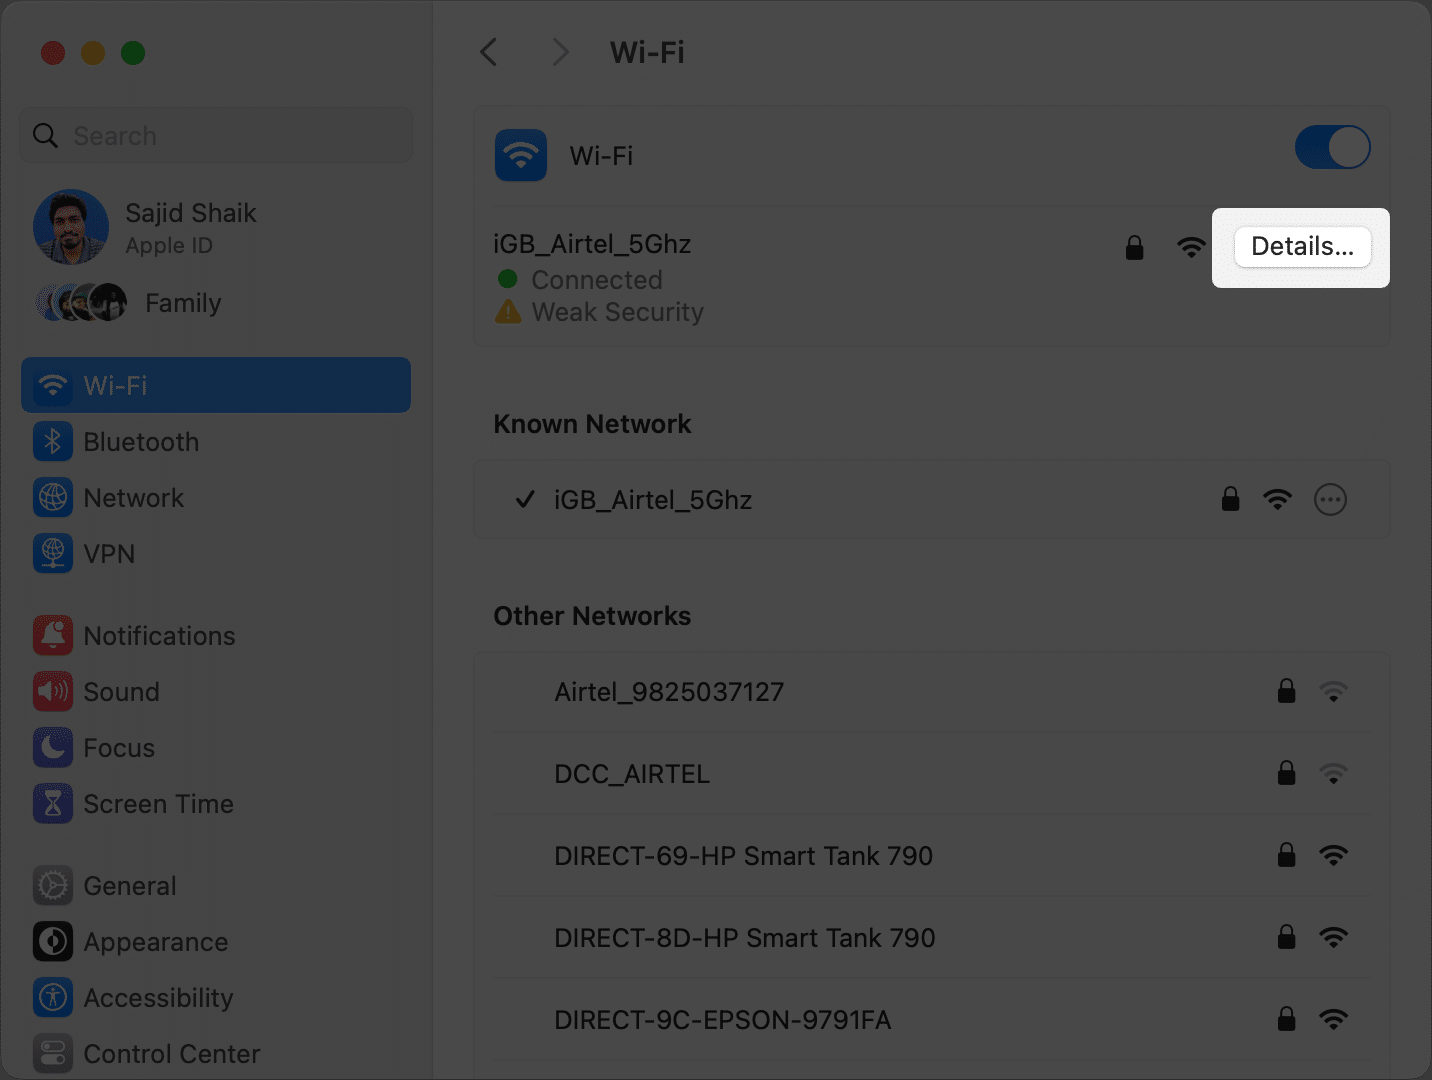 Click Details in Wi-Fi settings